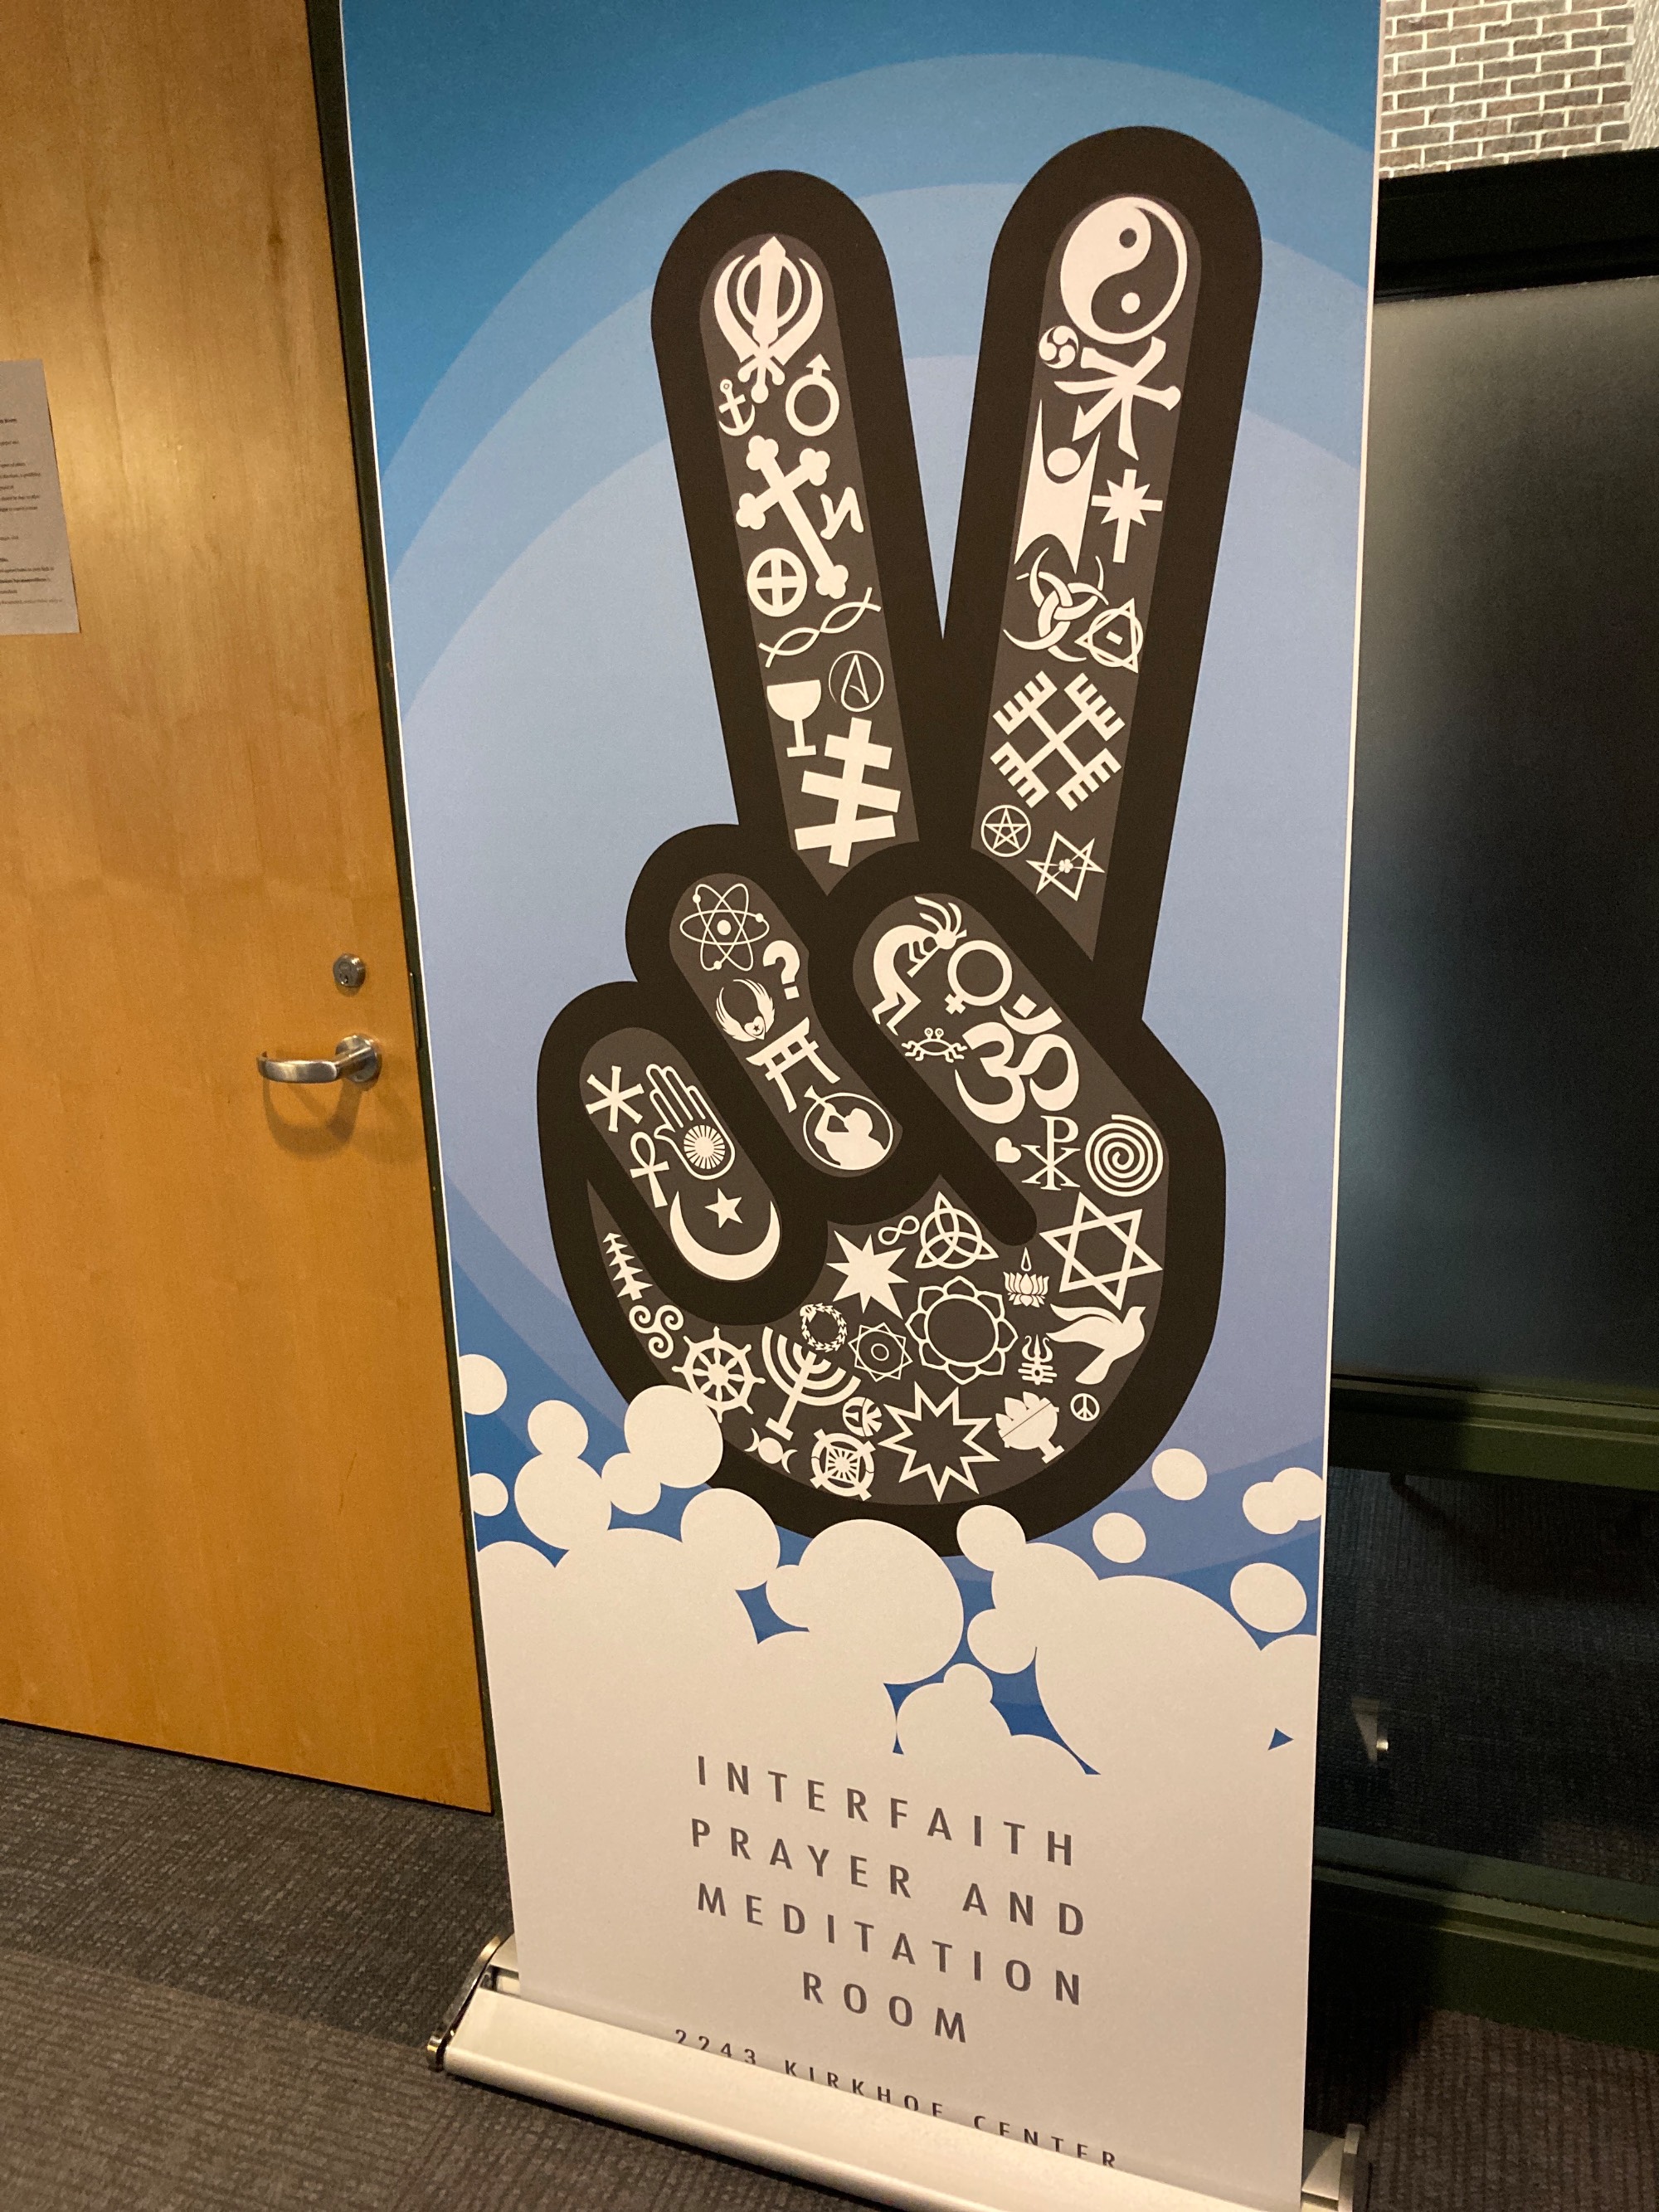 Peace sign banner with various religious symbols